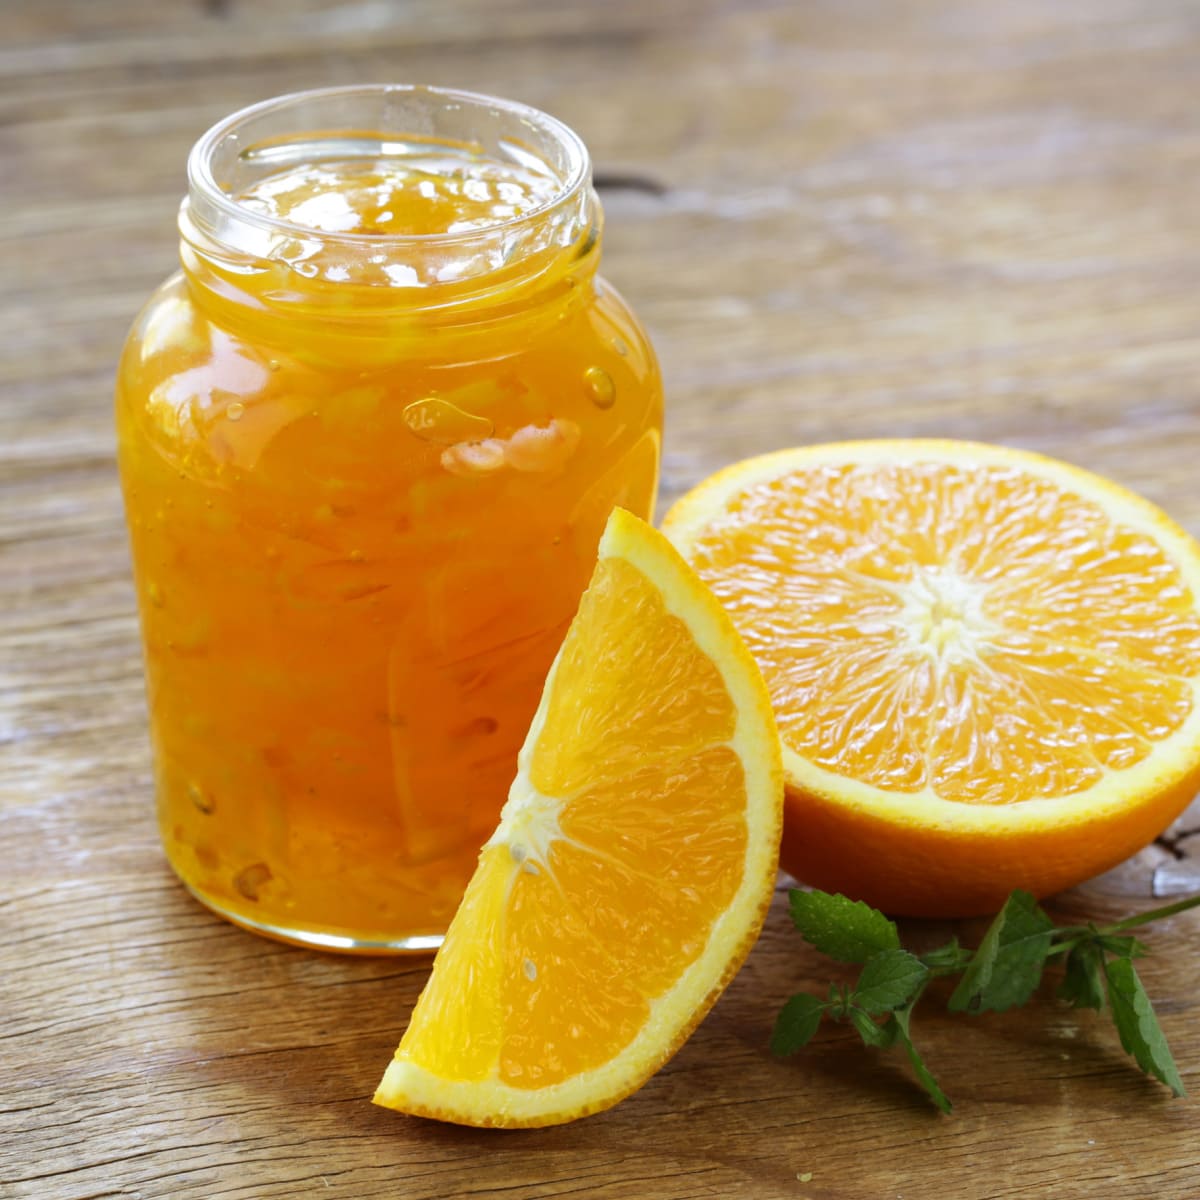 What Is Marmalade? (+ How to Make It) featuring A Jar of Orange Marmalade and Sliced Orange on a Wooden Table